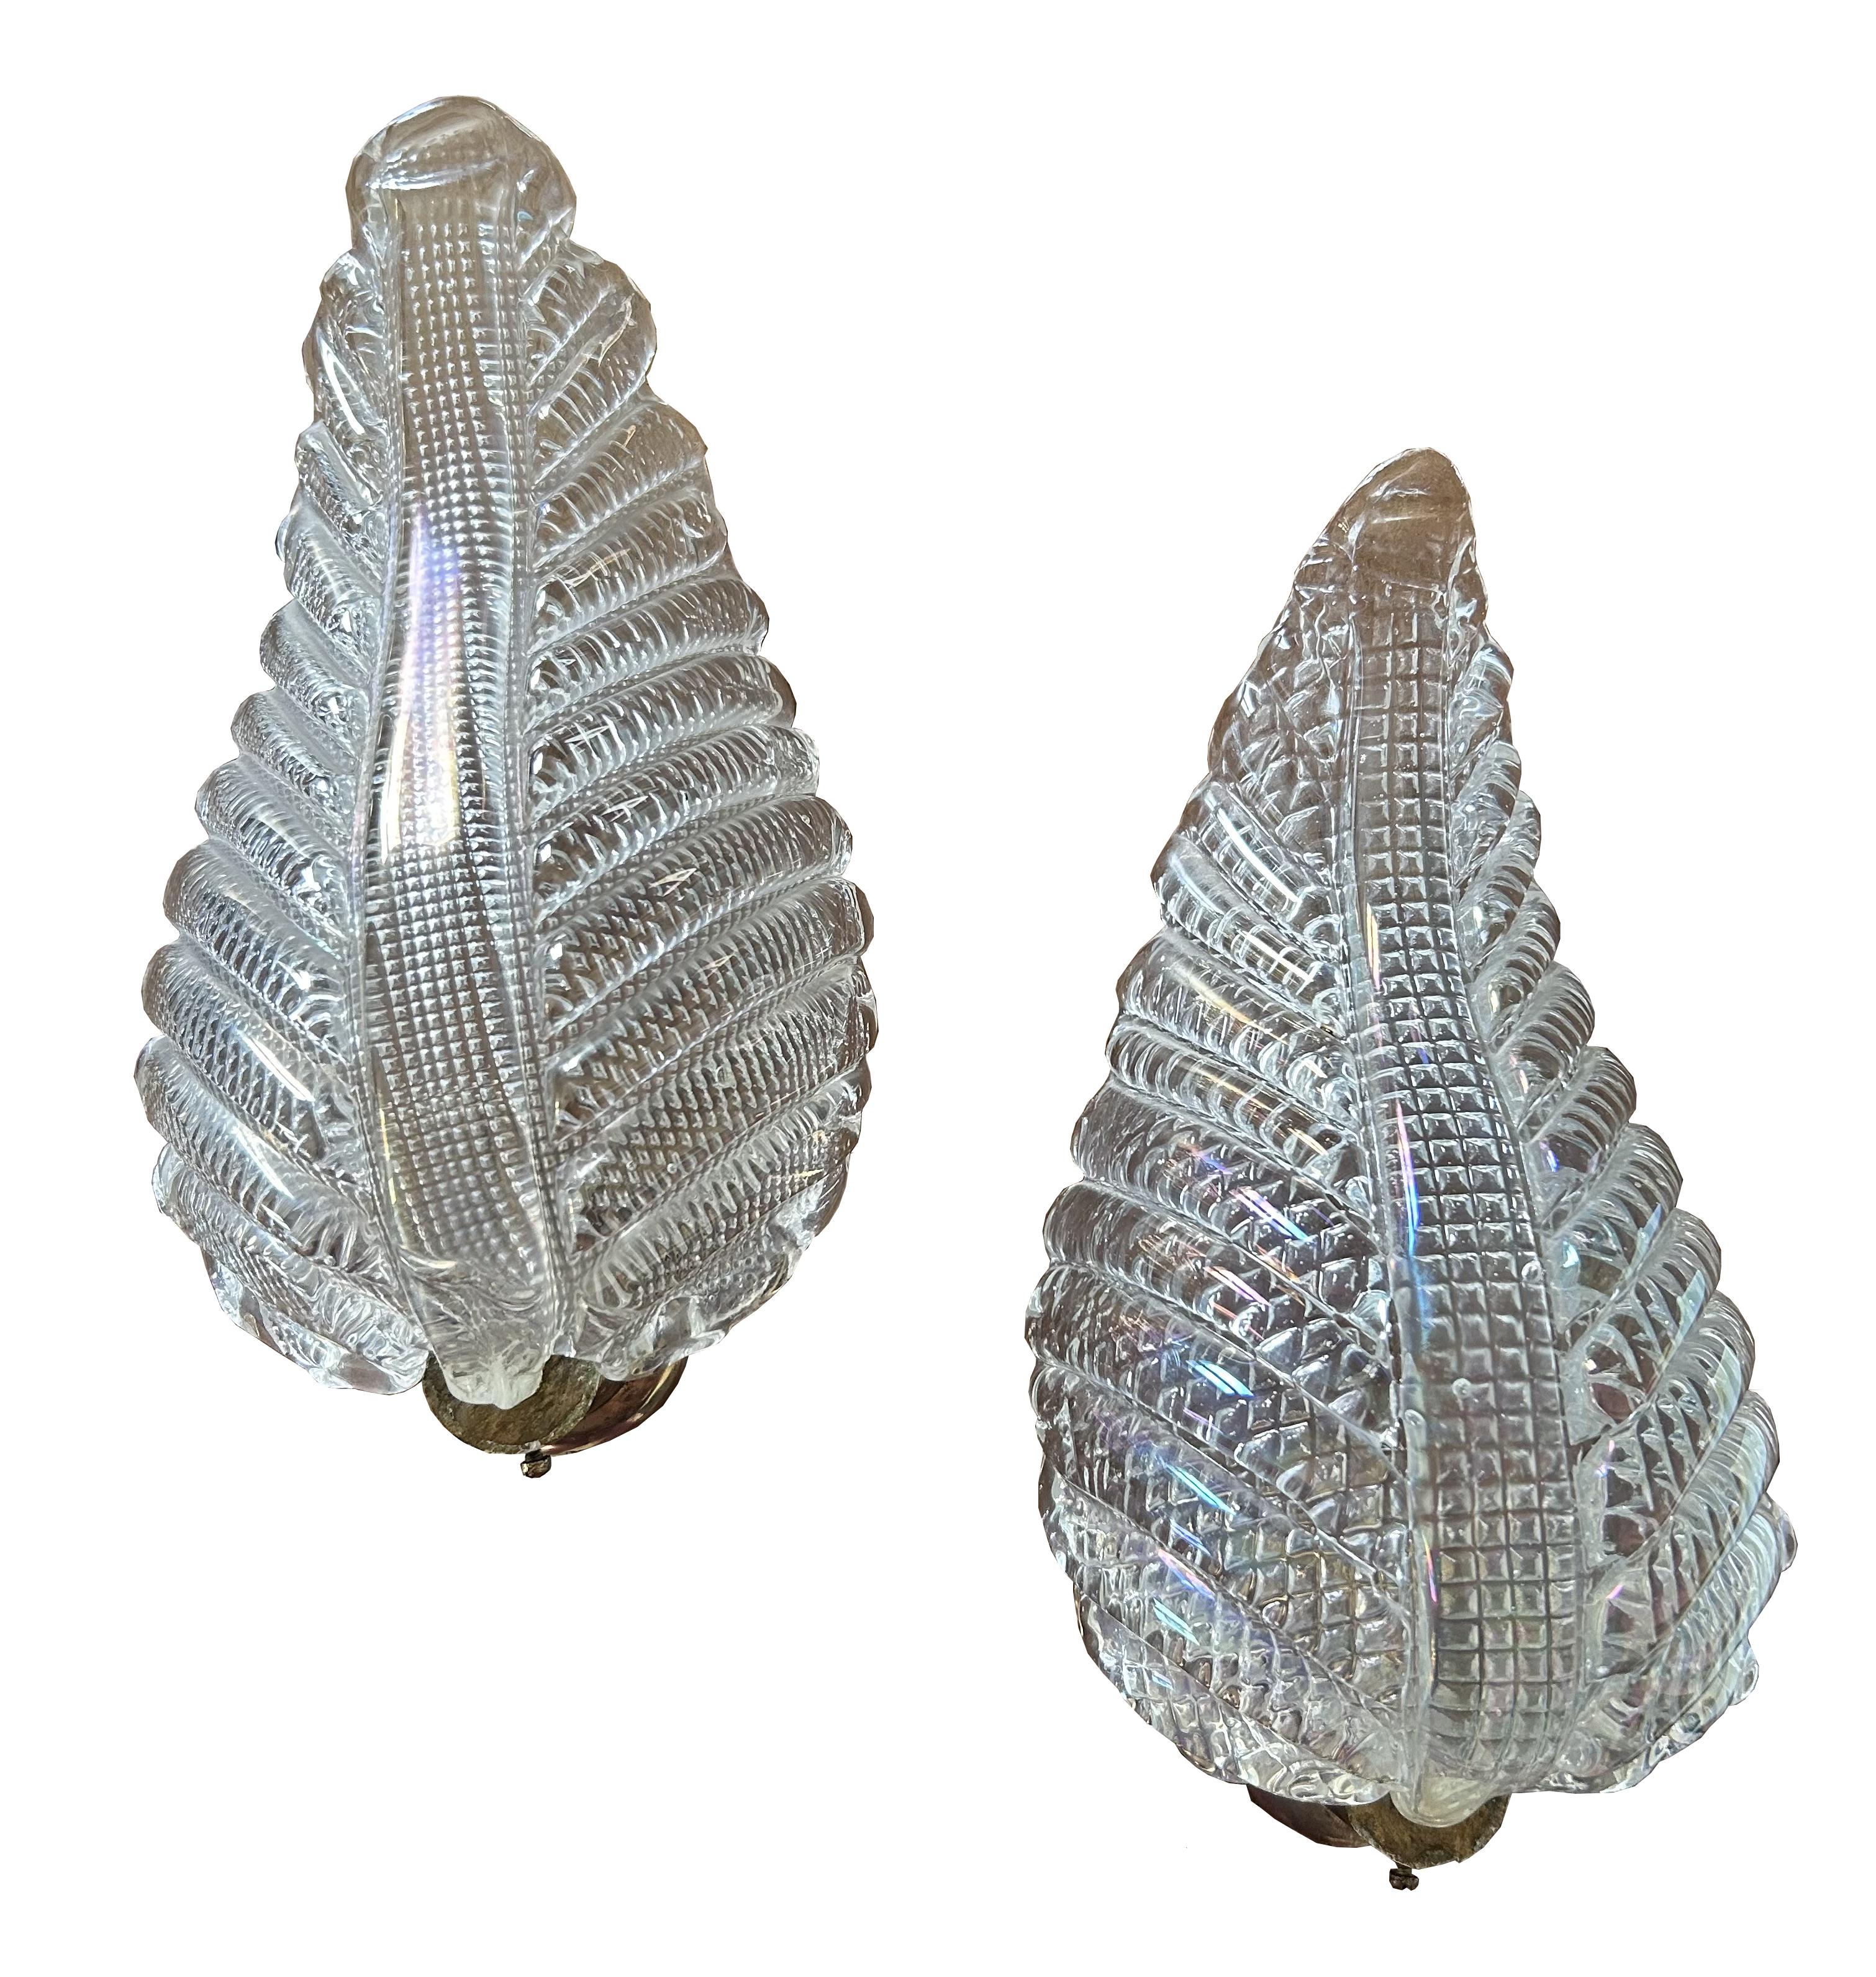 Fabulous Pair of Iridescent Murano Leaf Sconces, 1940's For Sale 3